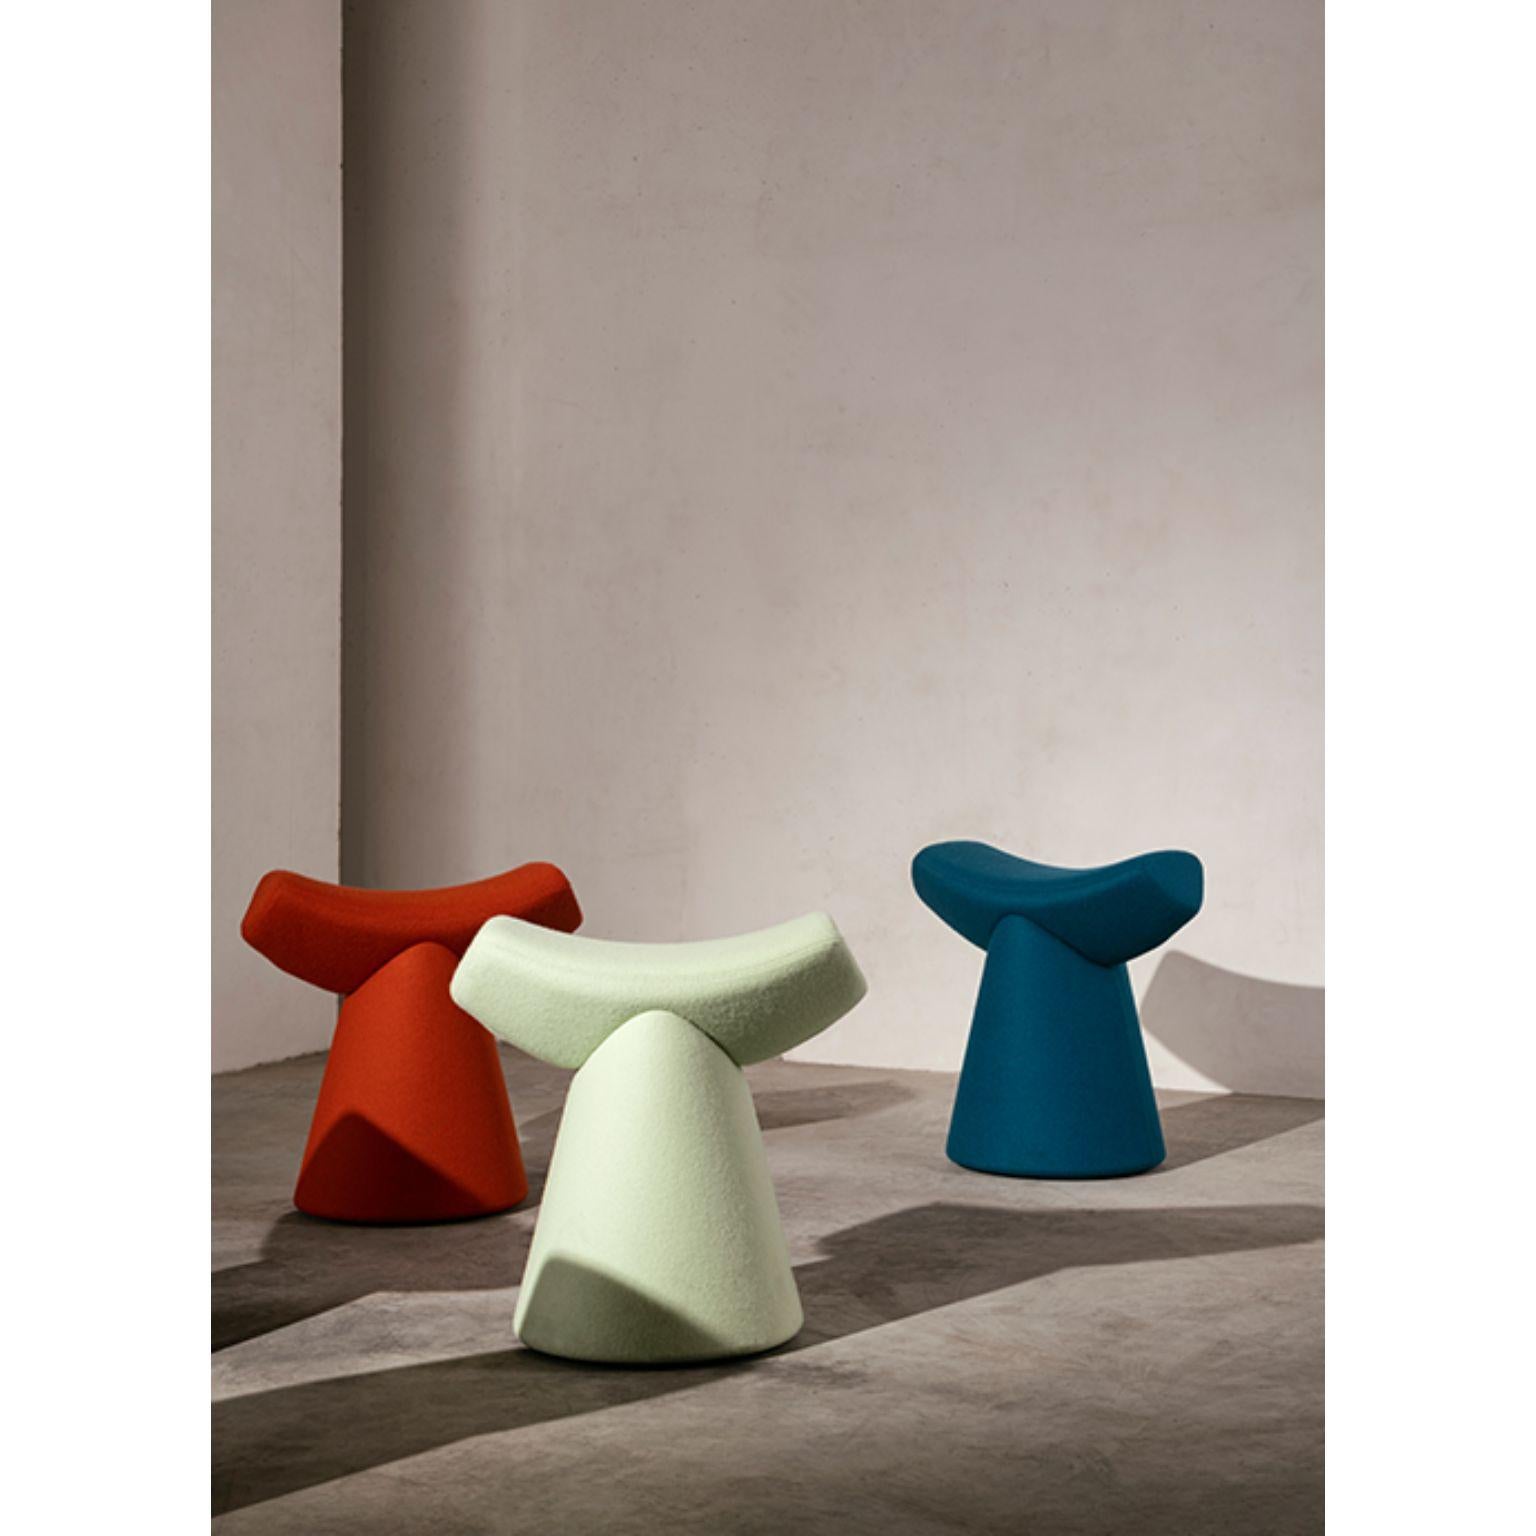 Set of 3 gardian stool by Patrick Norguet
Materials: Fabric (also available in leather)
 Handle: Noce Canaletto solid wood
Dimensions: W 51.1 x D 34.7 x H 49.8 cm.

For the Gardian stool by designer Patrick Norguet, the concept of seating was